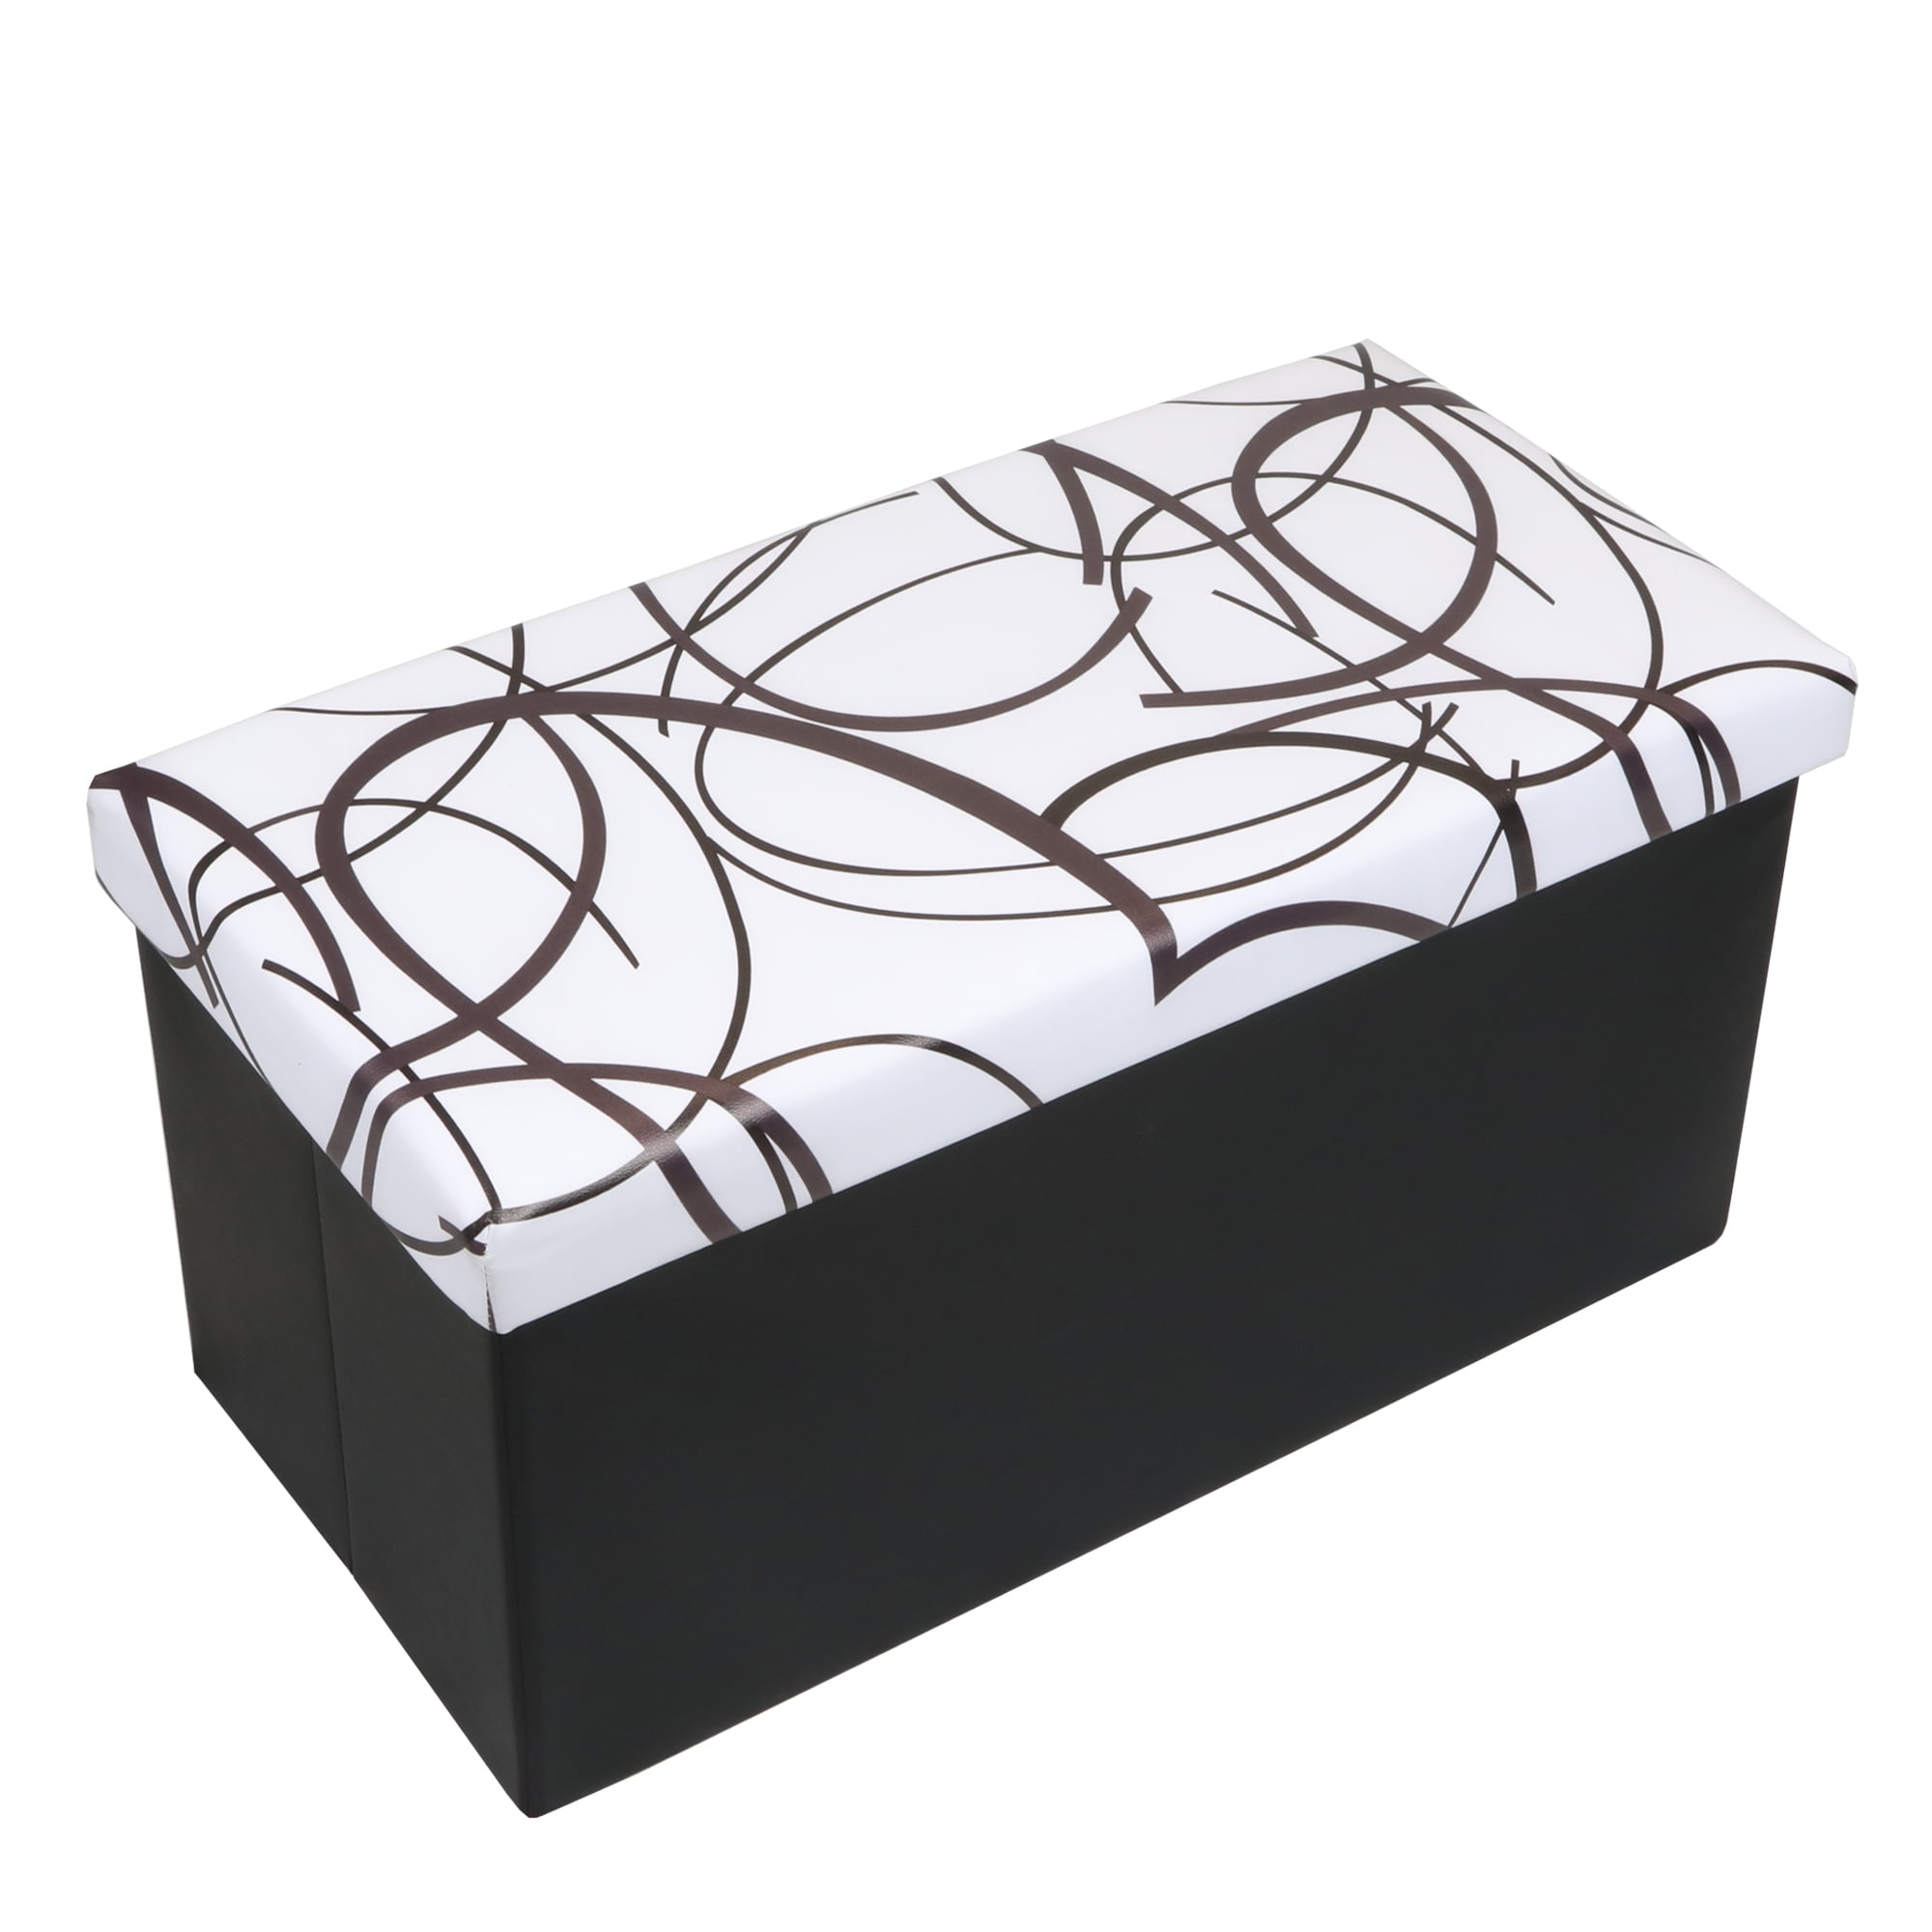 Faux Leather Storage Box with Removable Lid Black Relaxdays Folding Ottoman Seat 38 x 38 x 38 cm Sturdy Storage Chair and Practical Footstool 